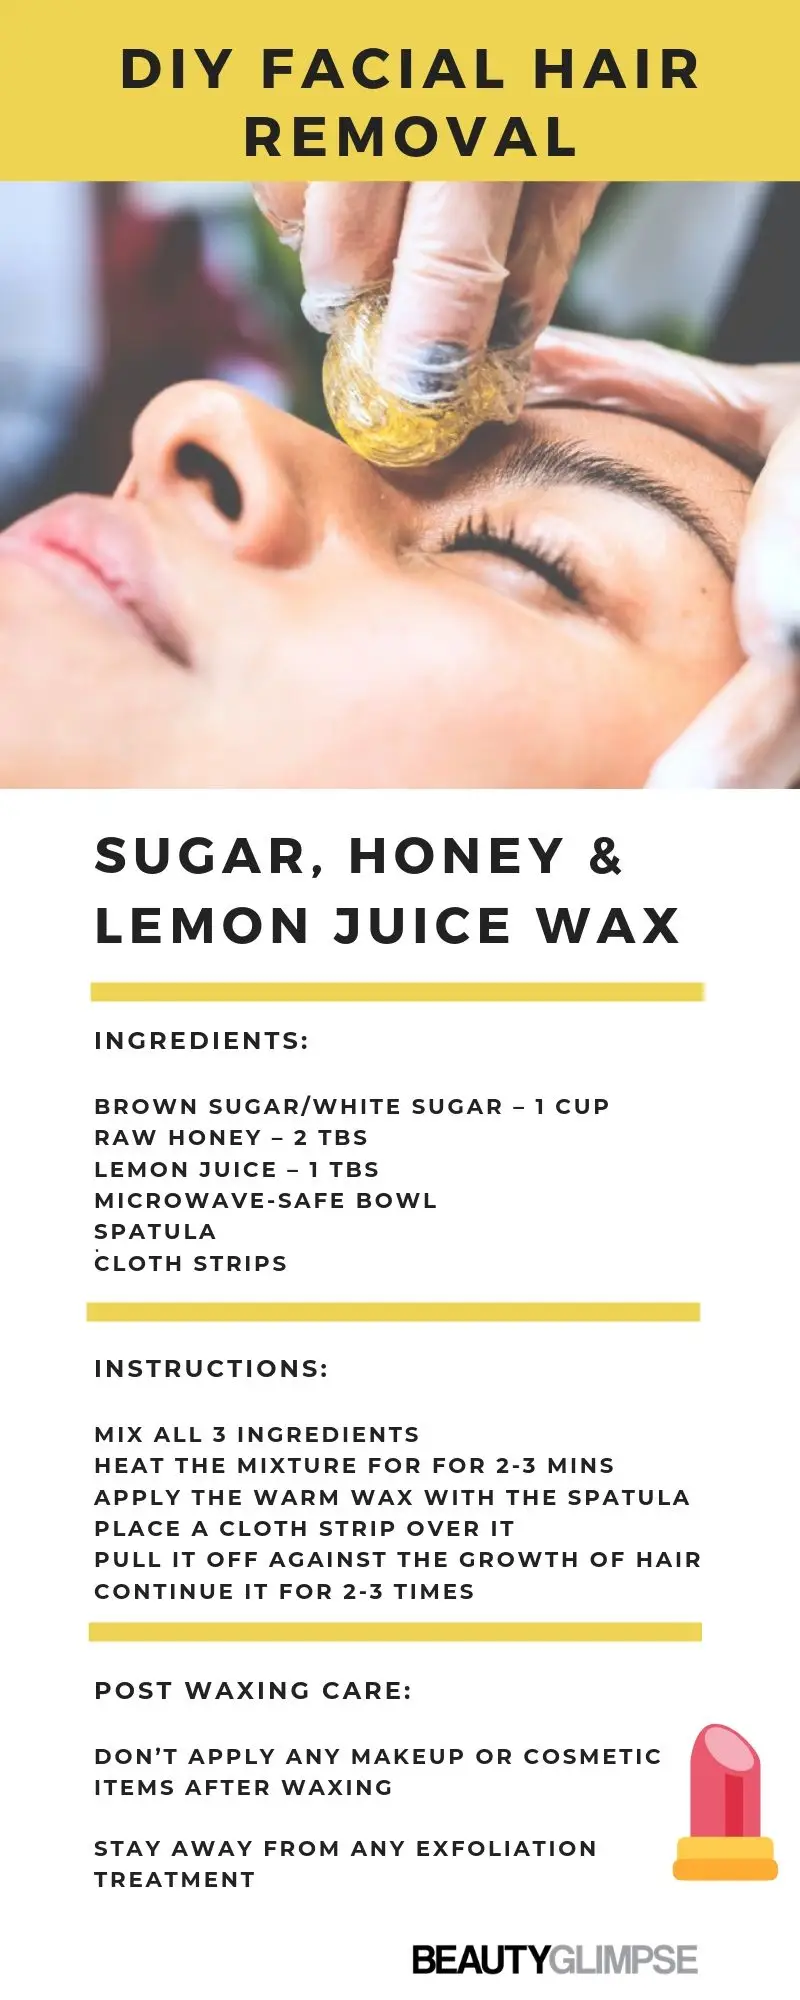 3 Homemade Wax Recipes for Facial Hair Removal You'd Love to Try